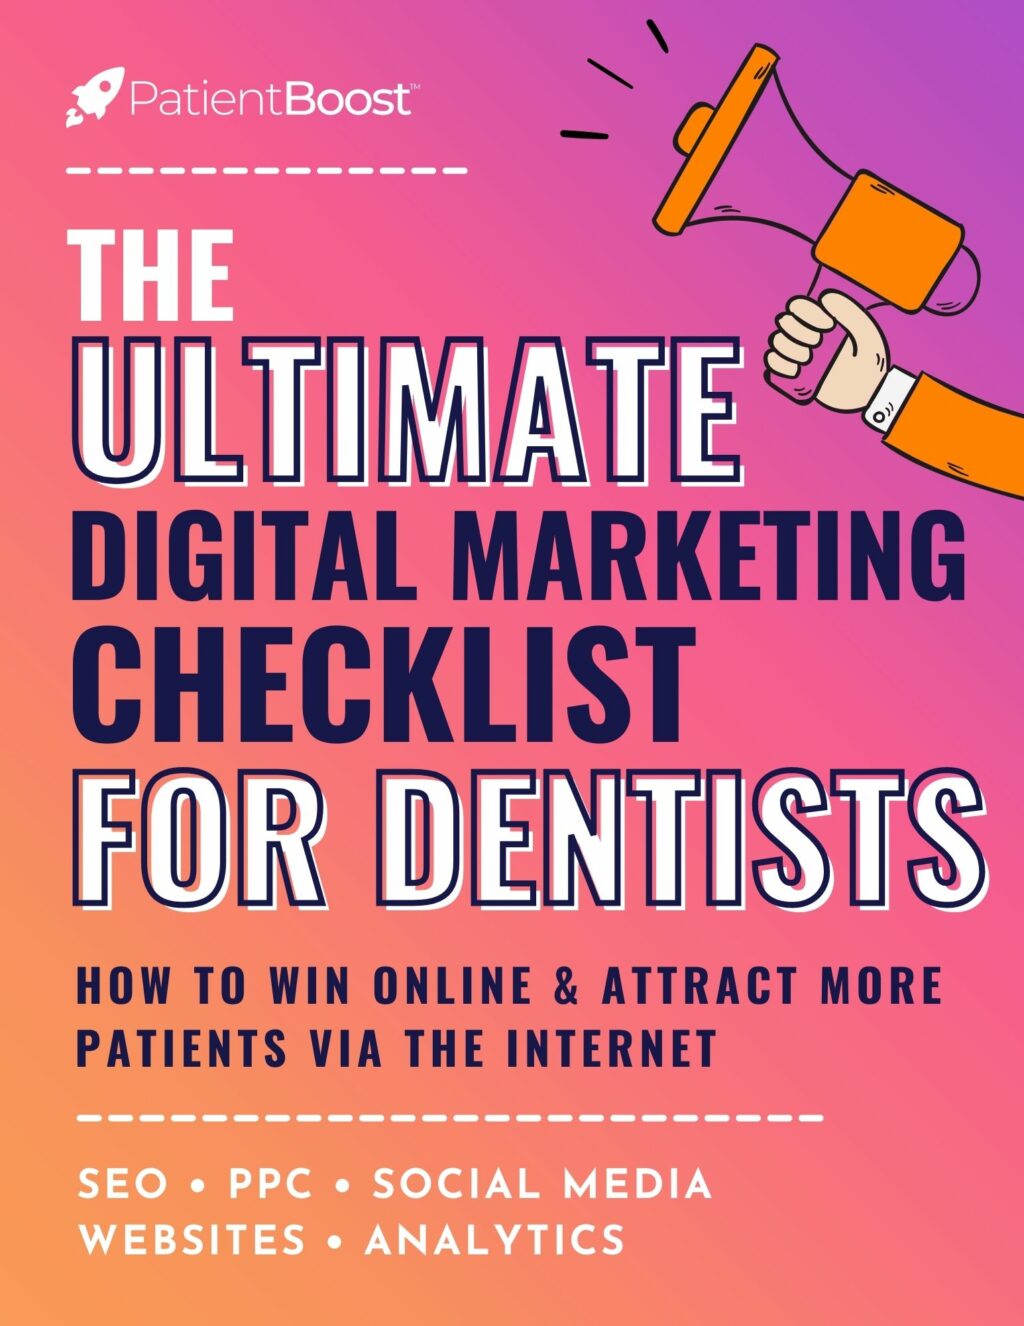 The Ultimate Digital Marketing Checklist For Dentists